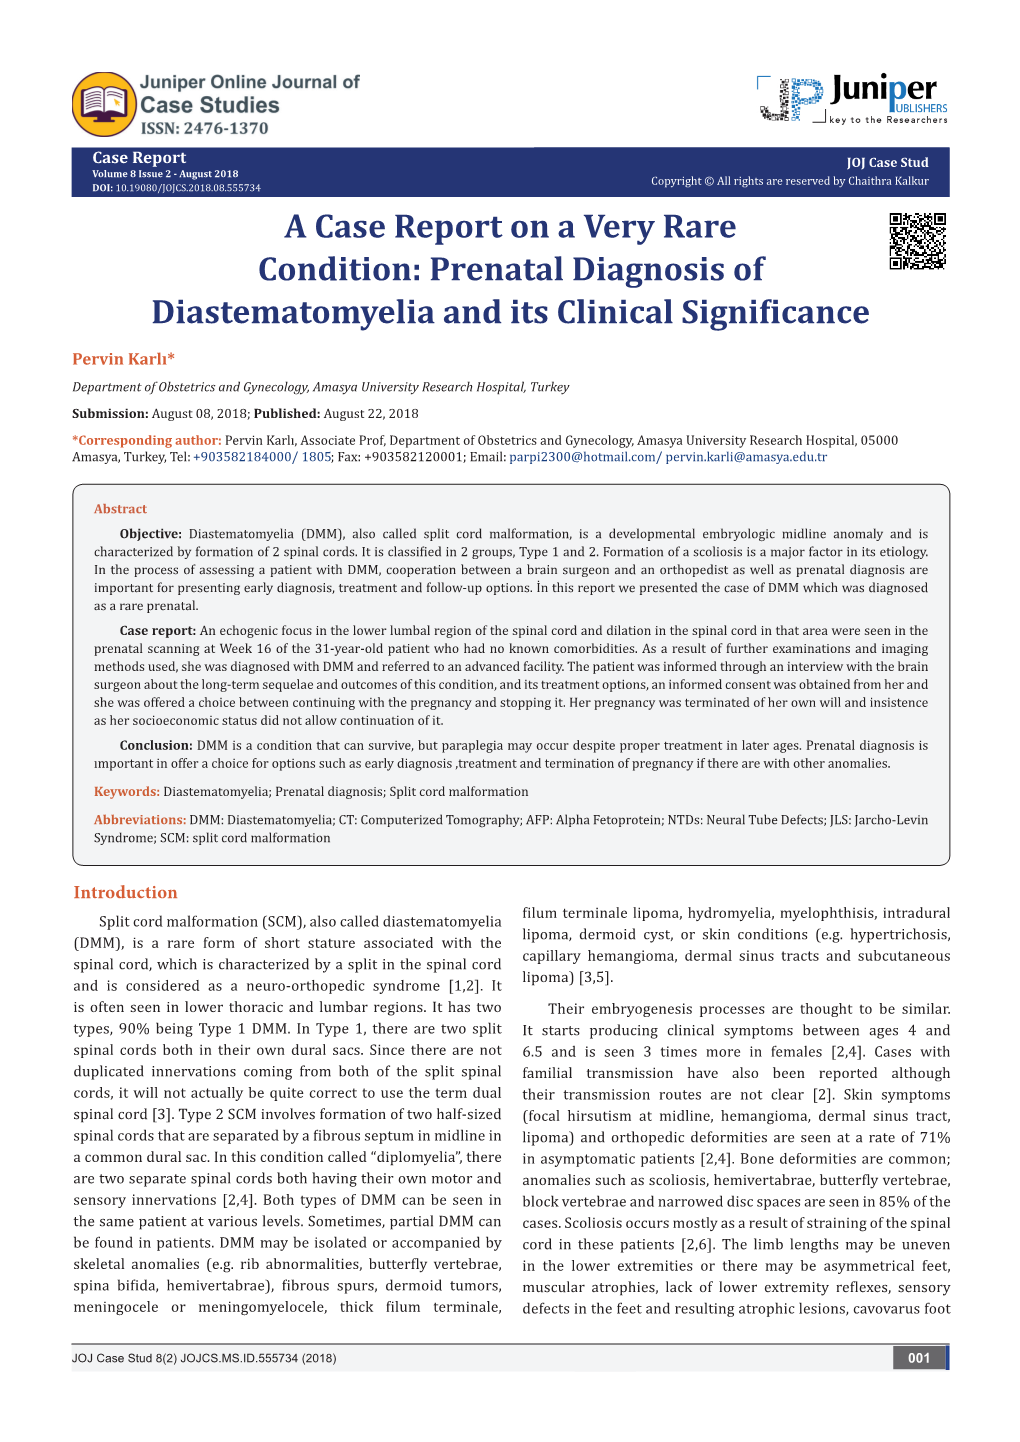 Prenatal Diagnosis of Diastematomyelia and Its Clinical Significance